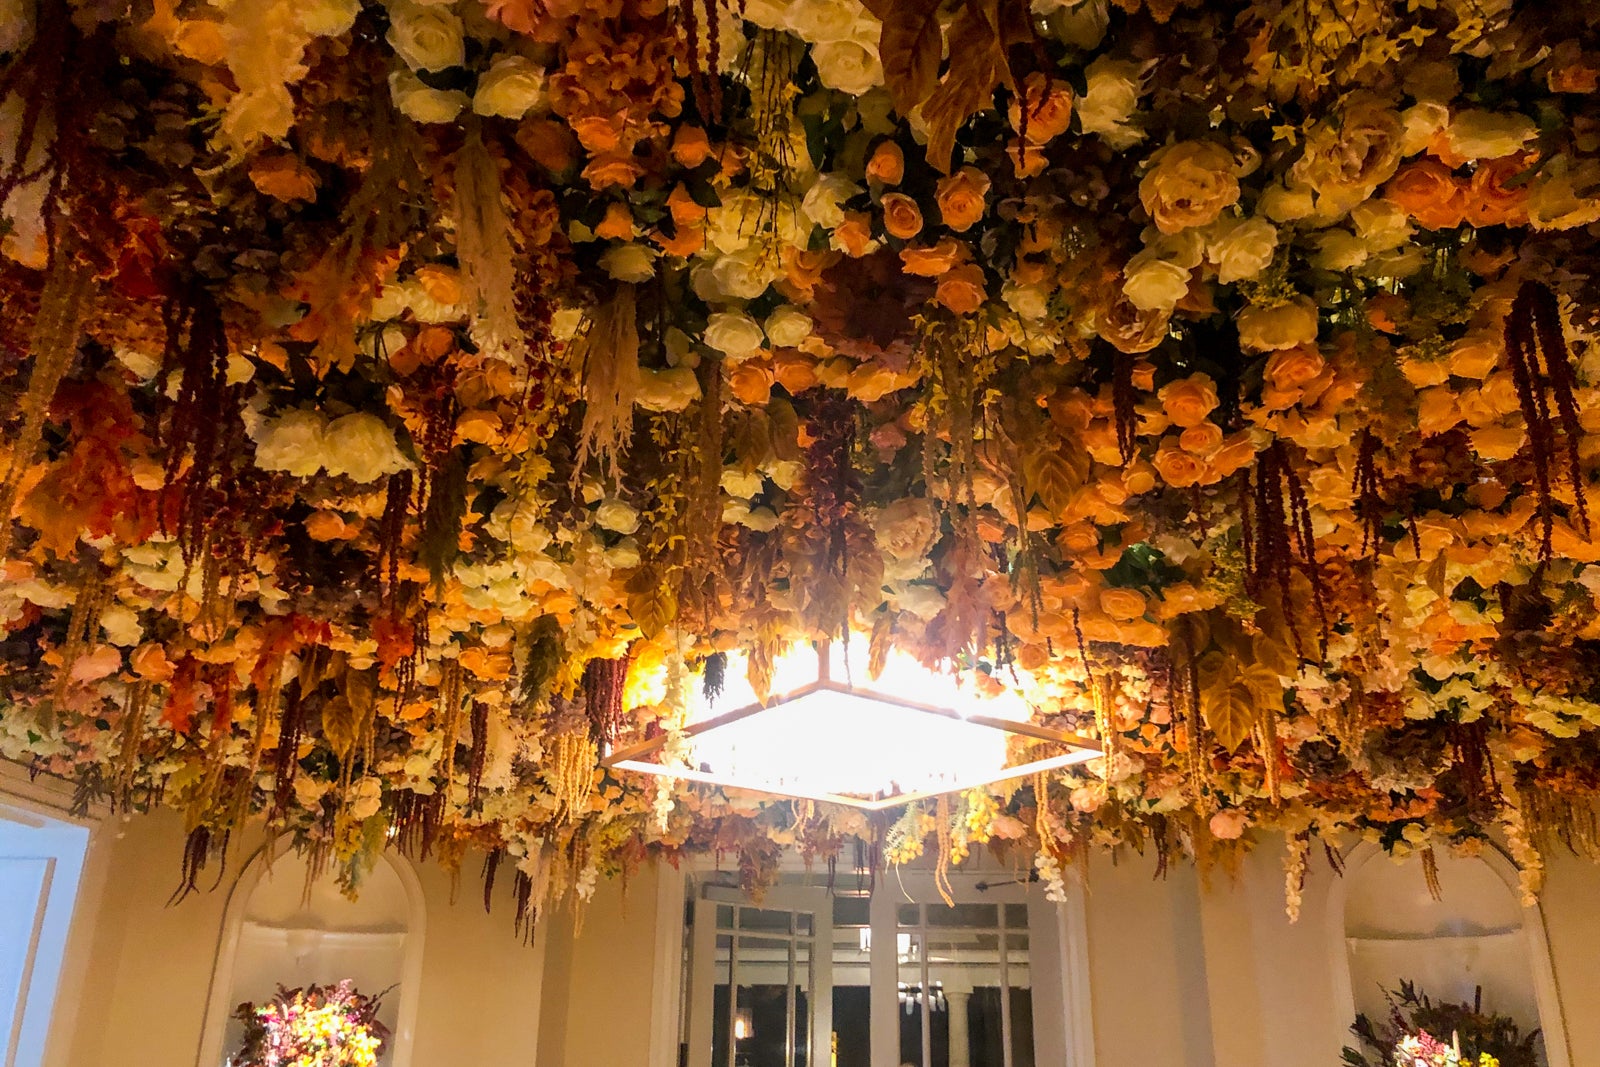 A view of the hotel entrance's chandelier decorated with fall foliage.